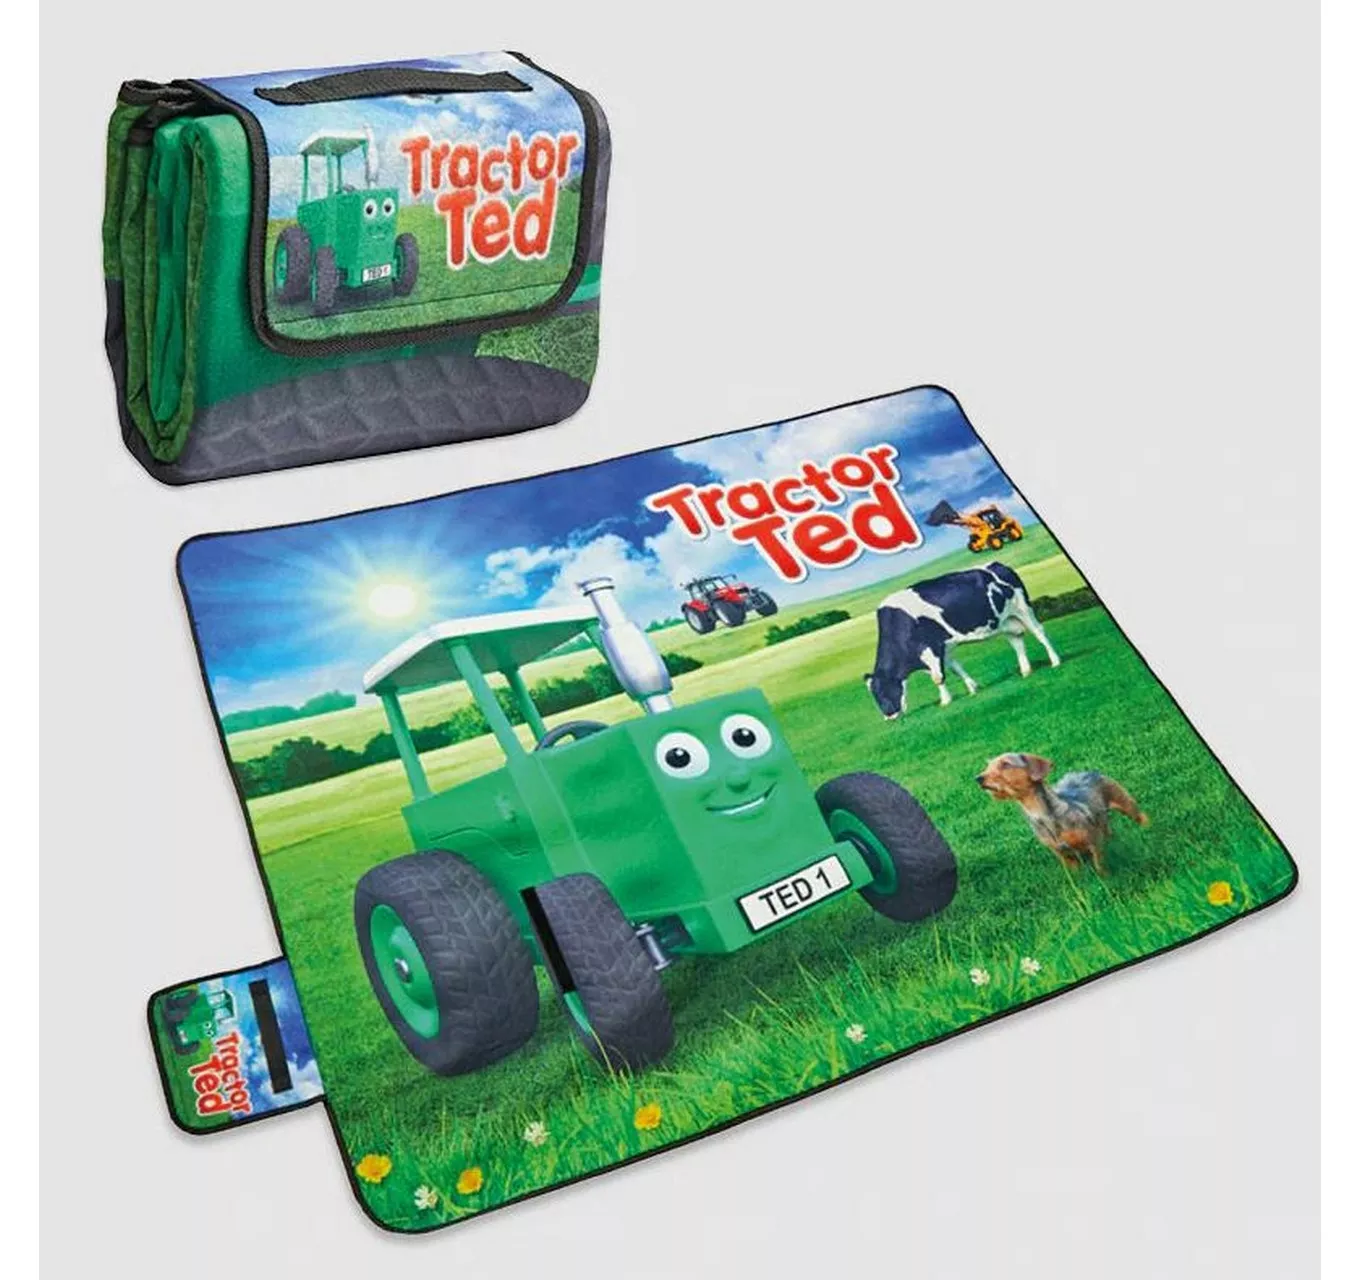 Tractor Ted Picnic Blanket